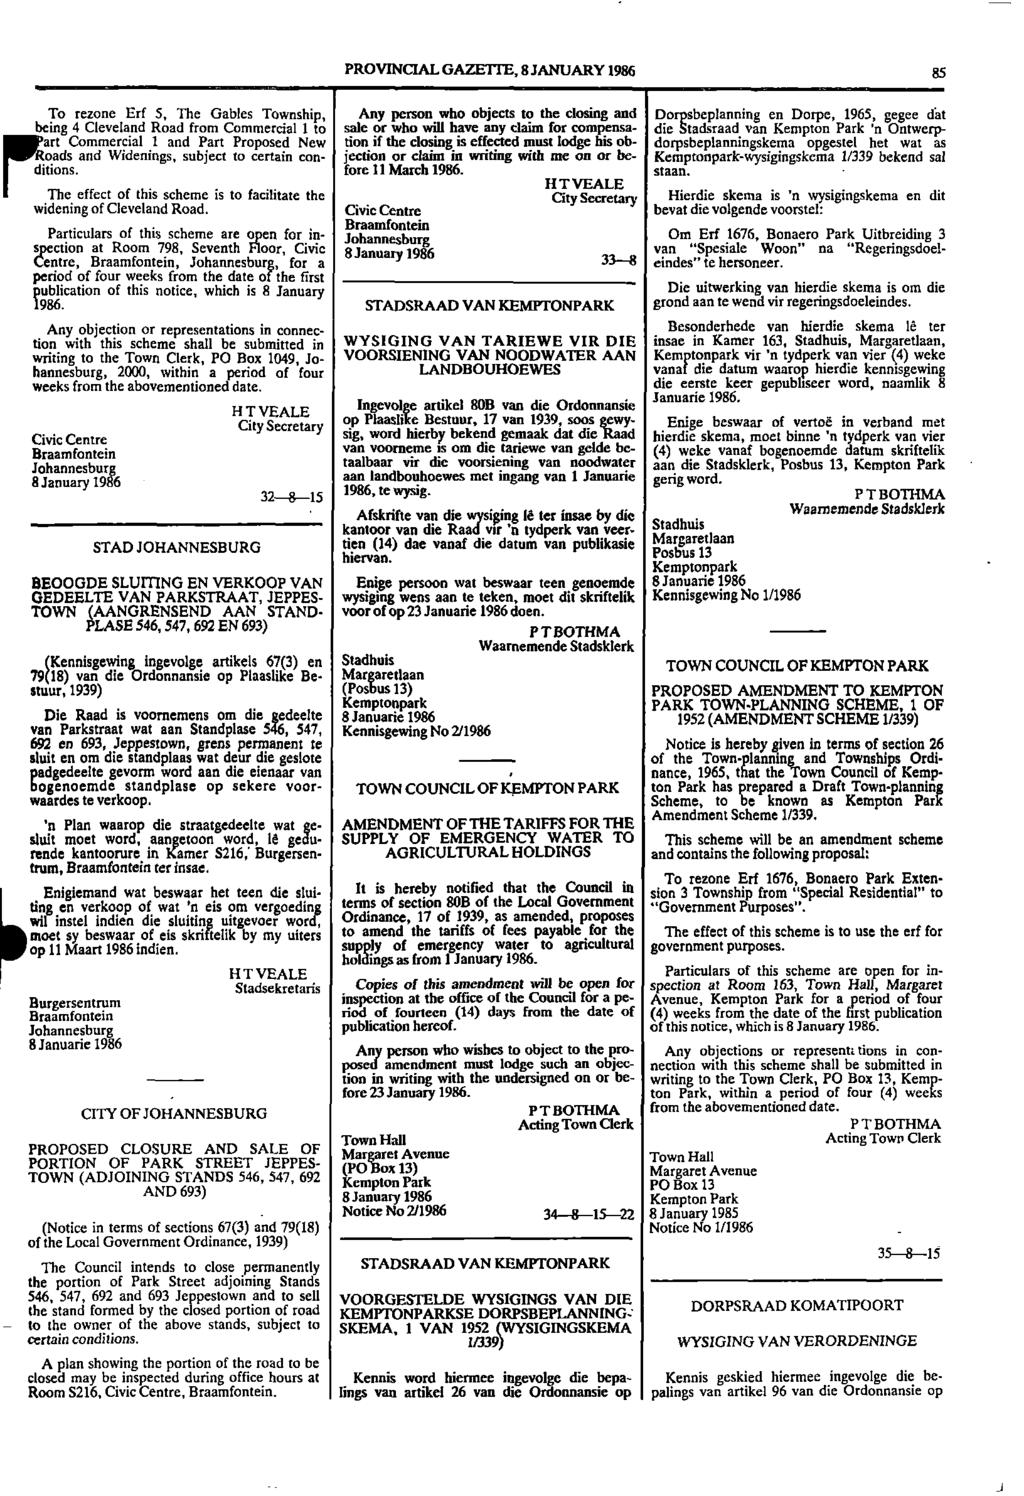 PROVINCIAL GAZETTE, 8 JANUARY 1986 85 To rezone Erf 5, The Gables Township, Any person who objects to the closing and Dorpsbeplanning en Dorpe, 1965, gegee dat being 4 Cleveland Road from Commercial